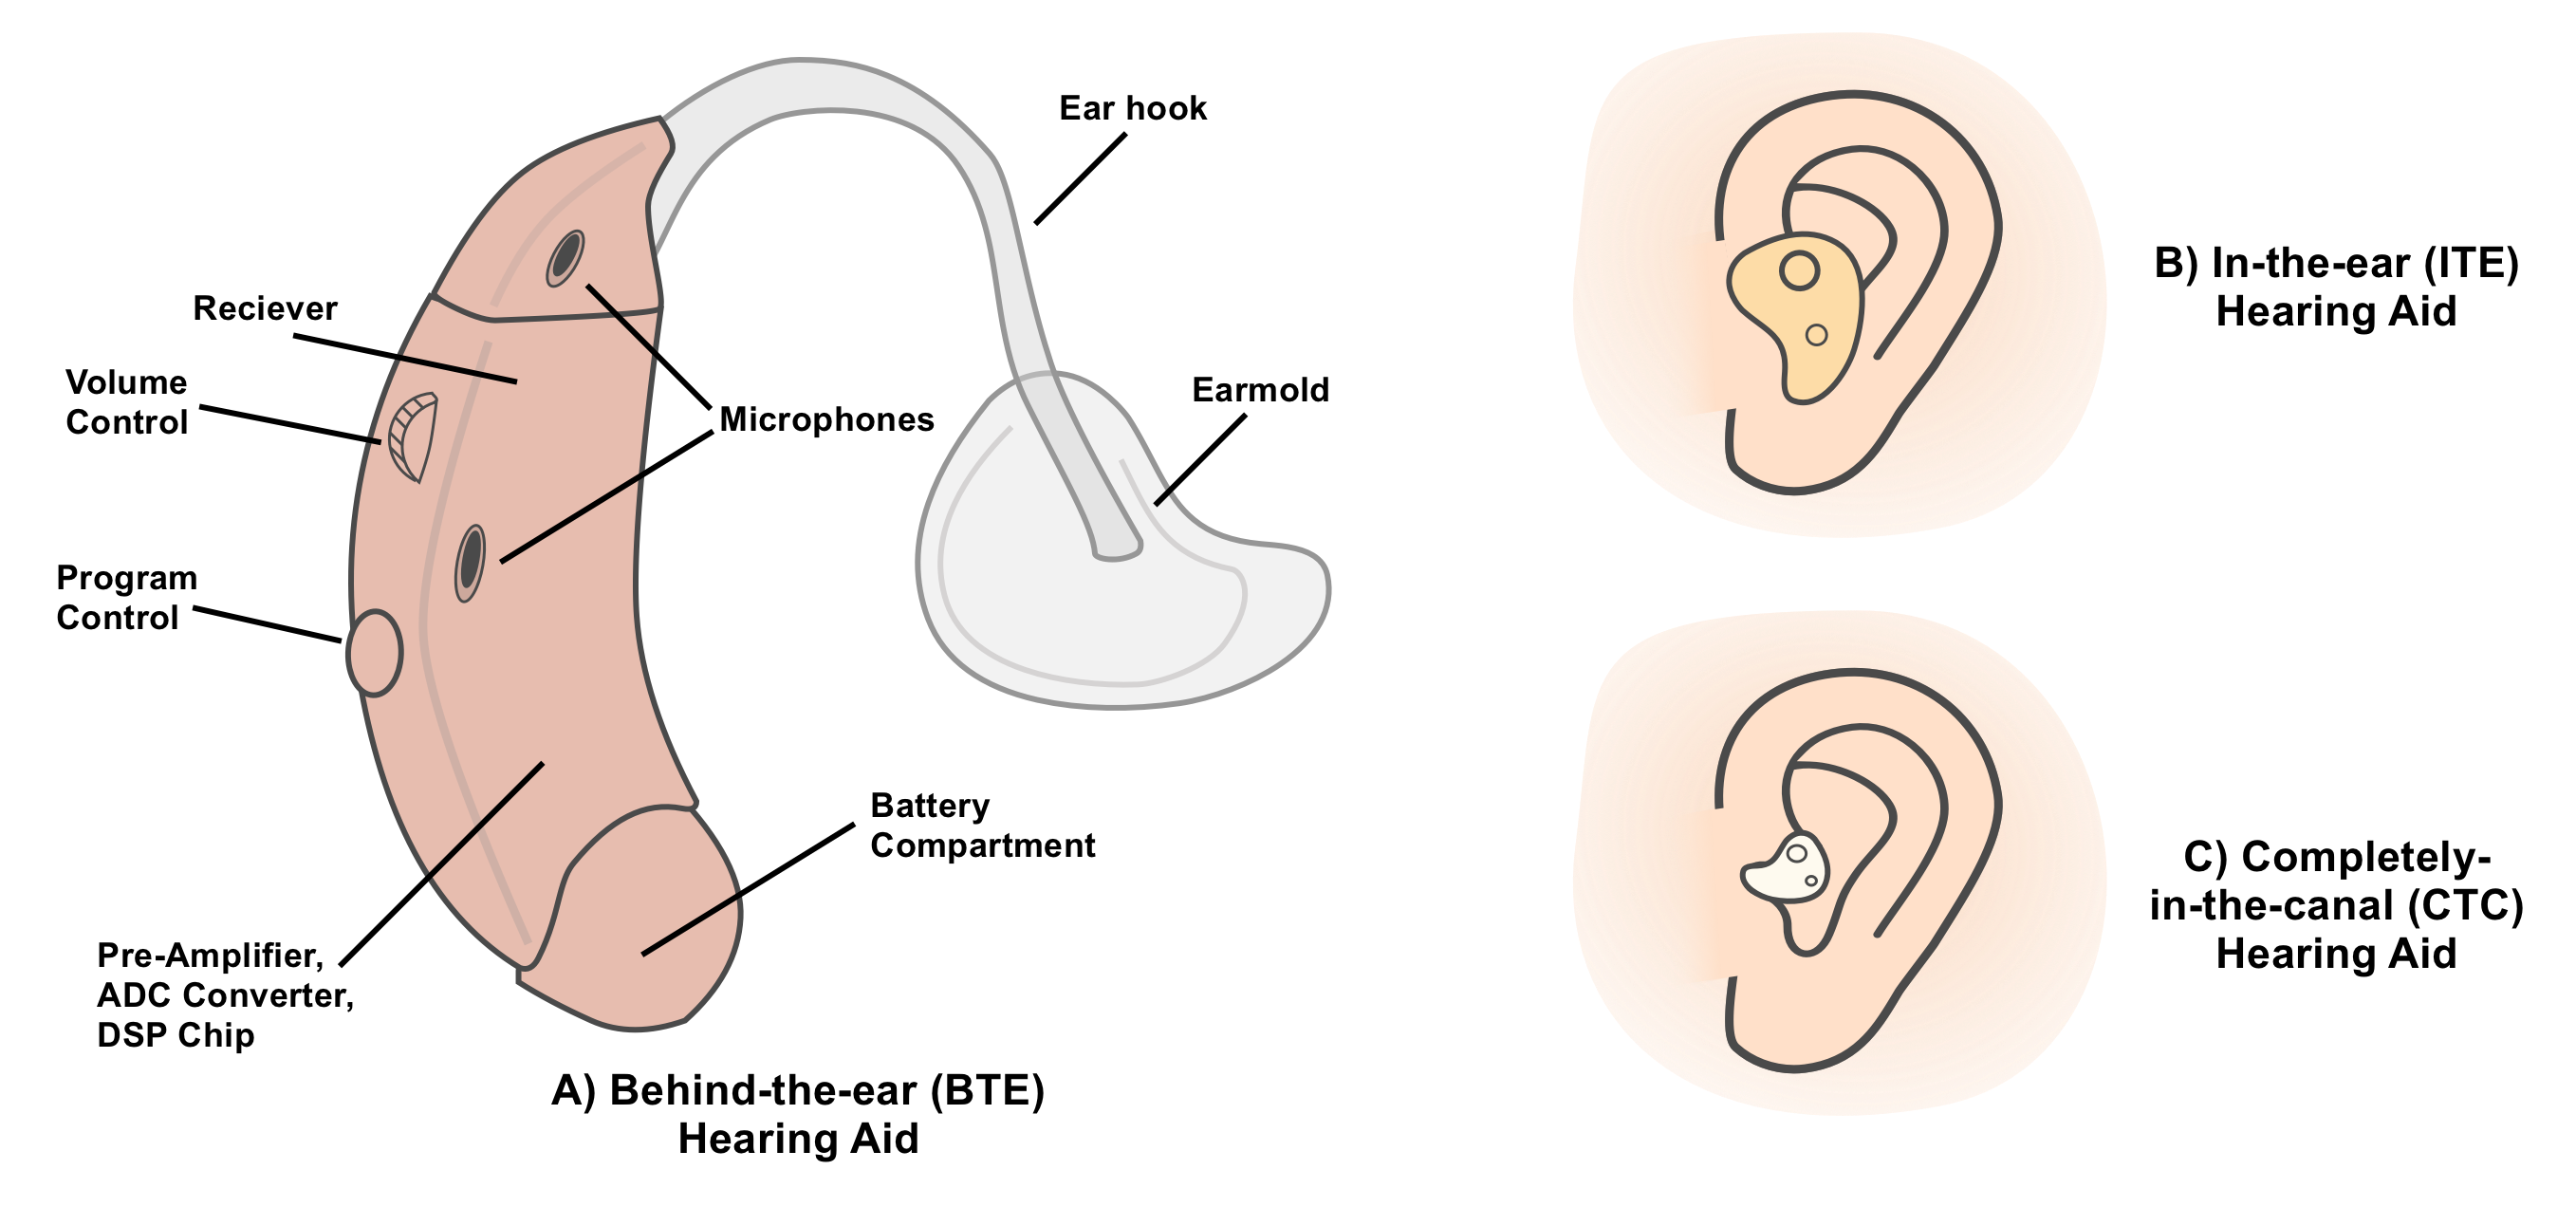 Three different types of hearing aids